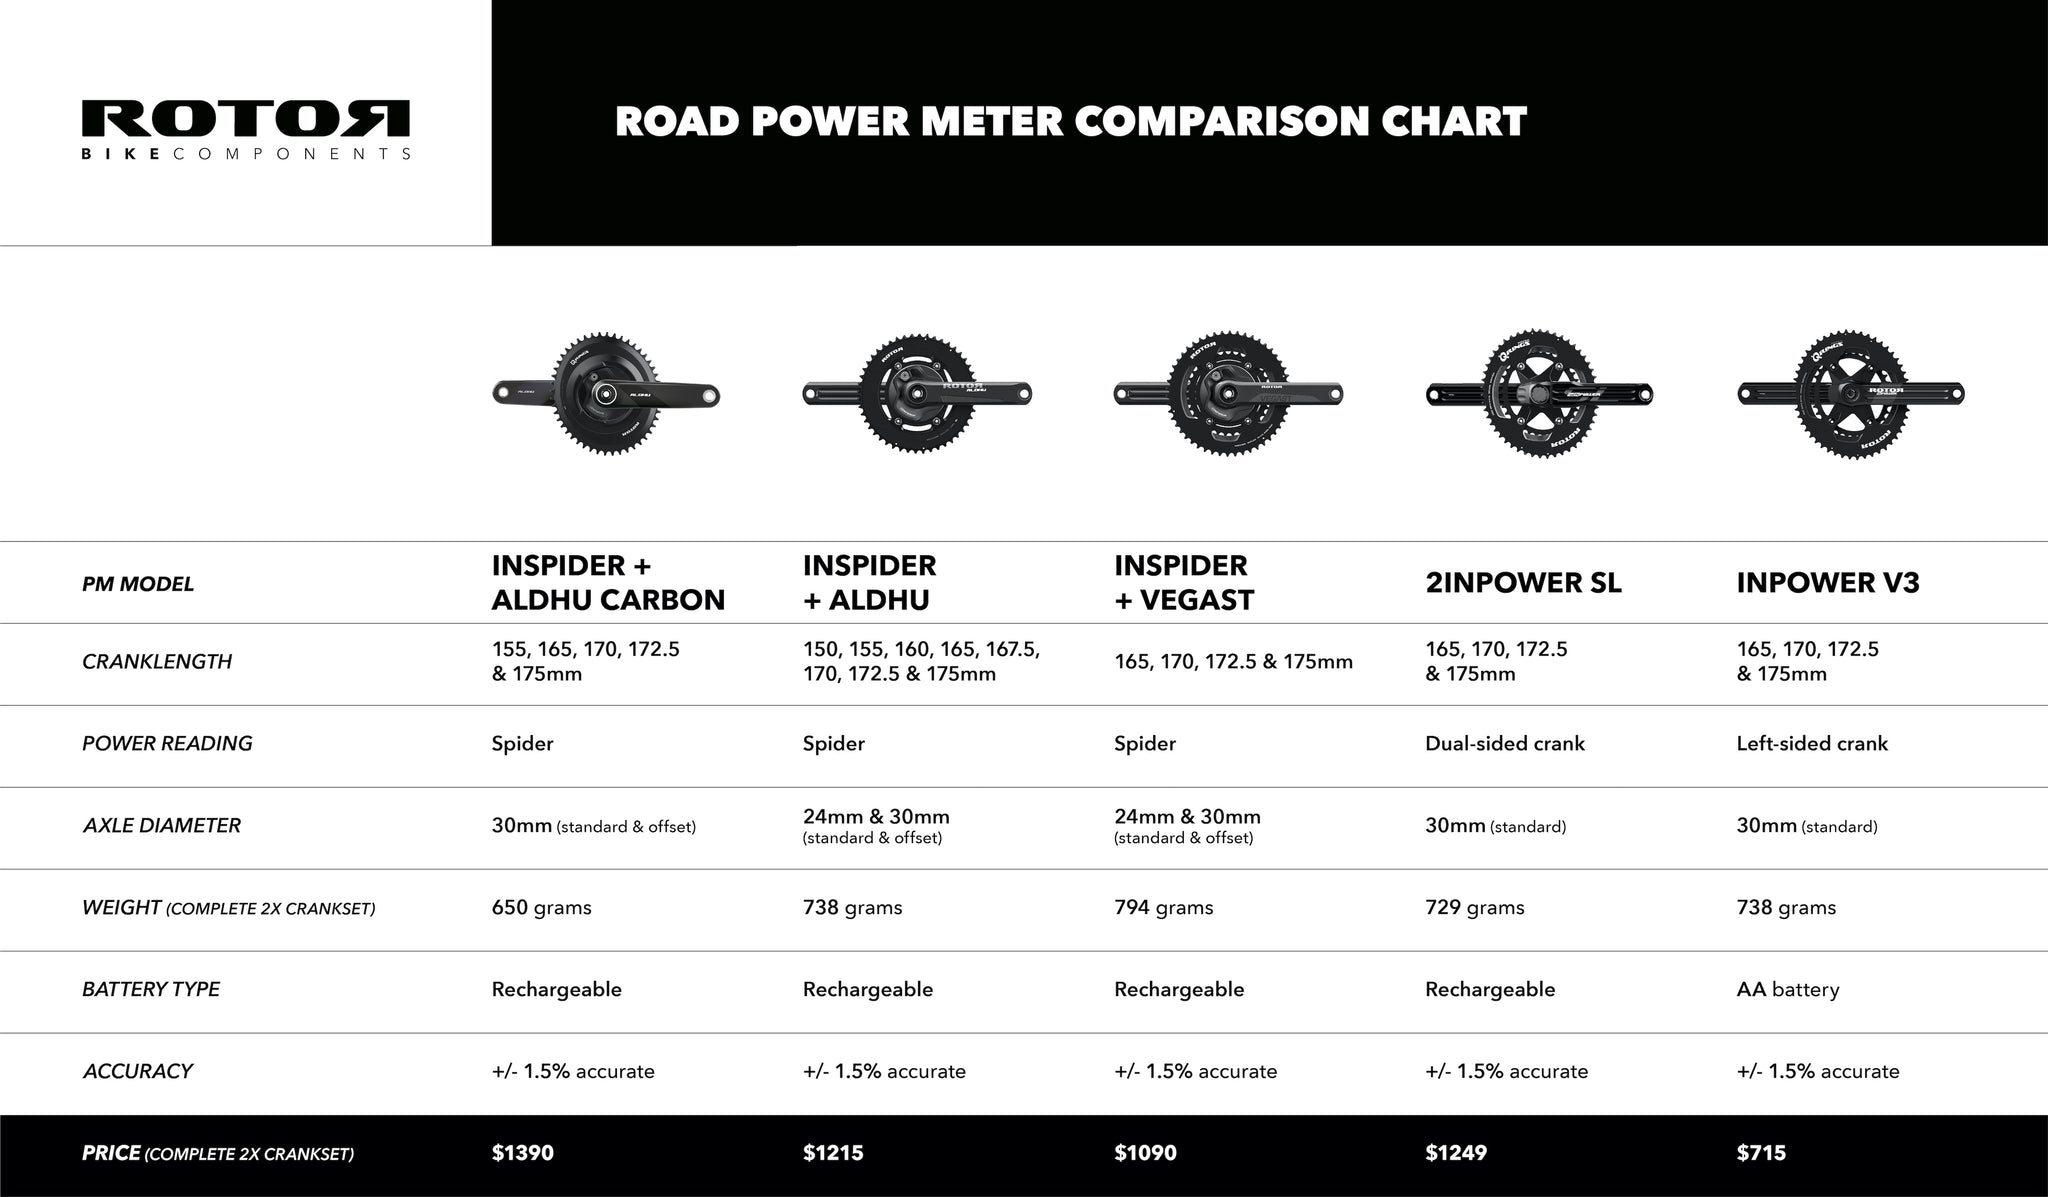 Finding The Right Power Meter For You